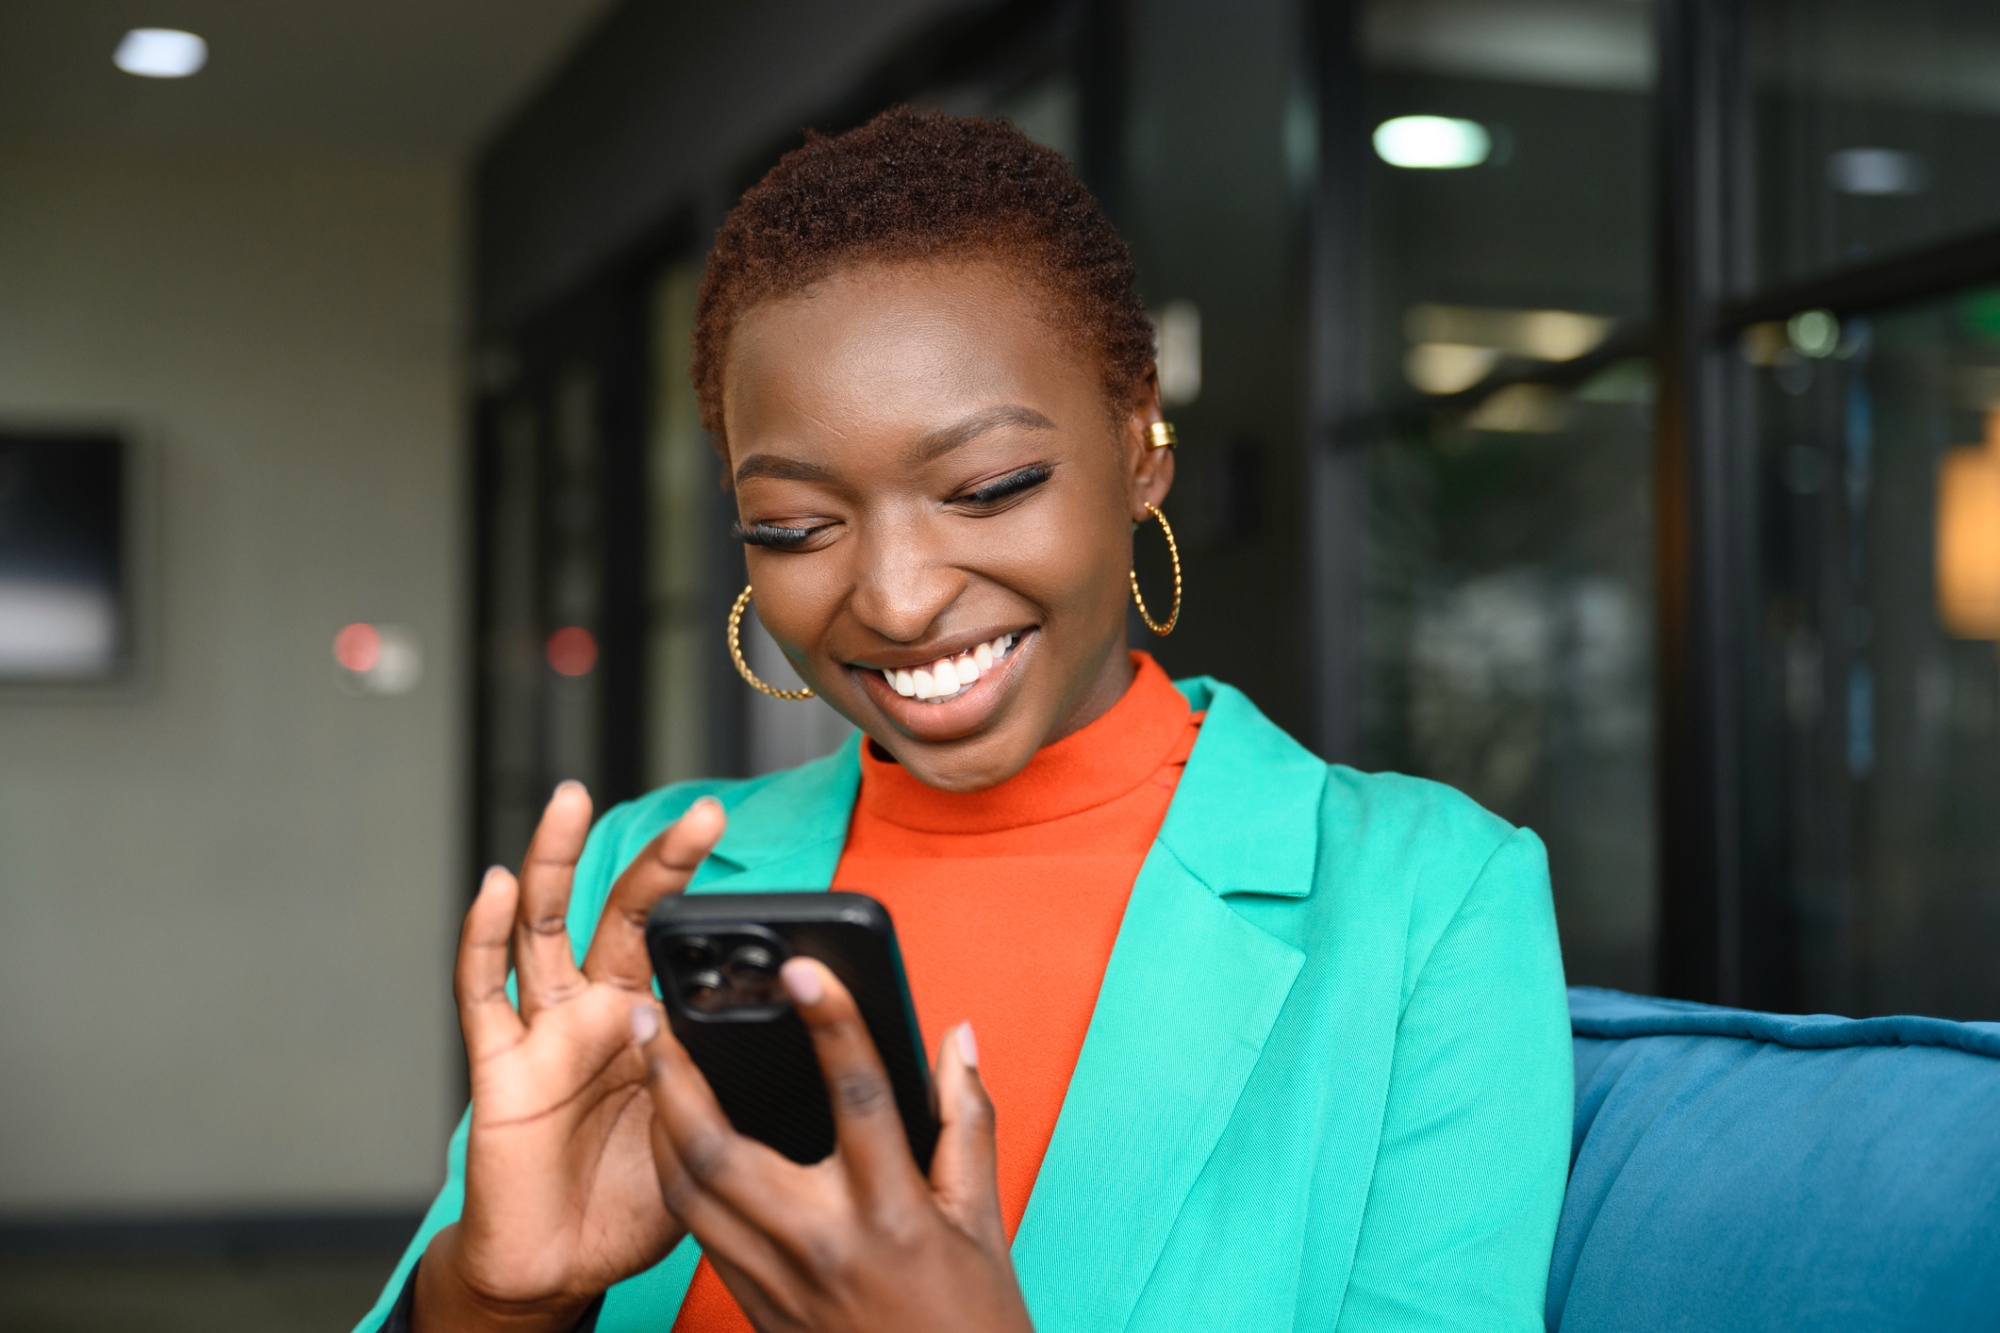 Cheerful business woman using smartphone | © JohnnyGreig / E+ / Getty Images